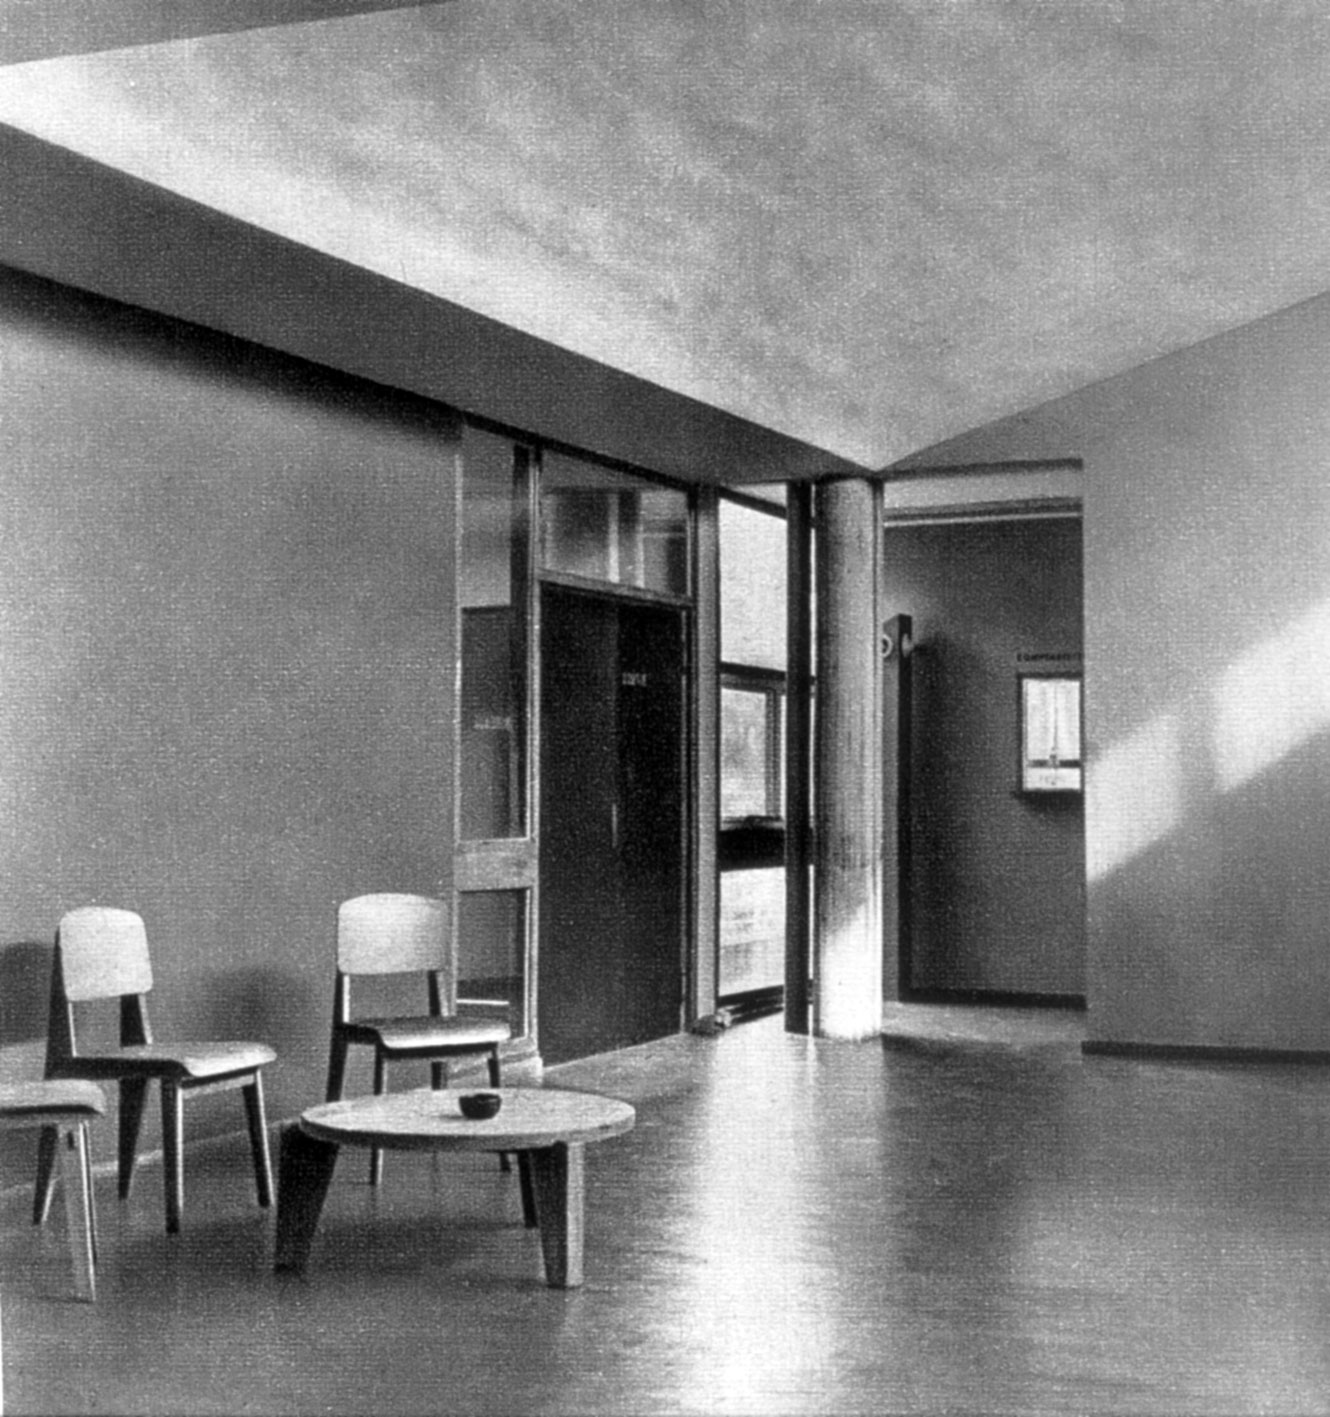 Claude and Duval factory, Saint-Dié, (architect Le Corbusier, 1948–1951). Waiting room furnished with Tout Bois chairs and a guéridon no. 402. Published in <i>Domus,</i> April 1953.